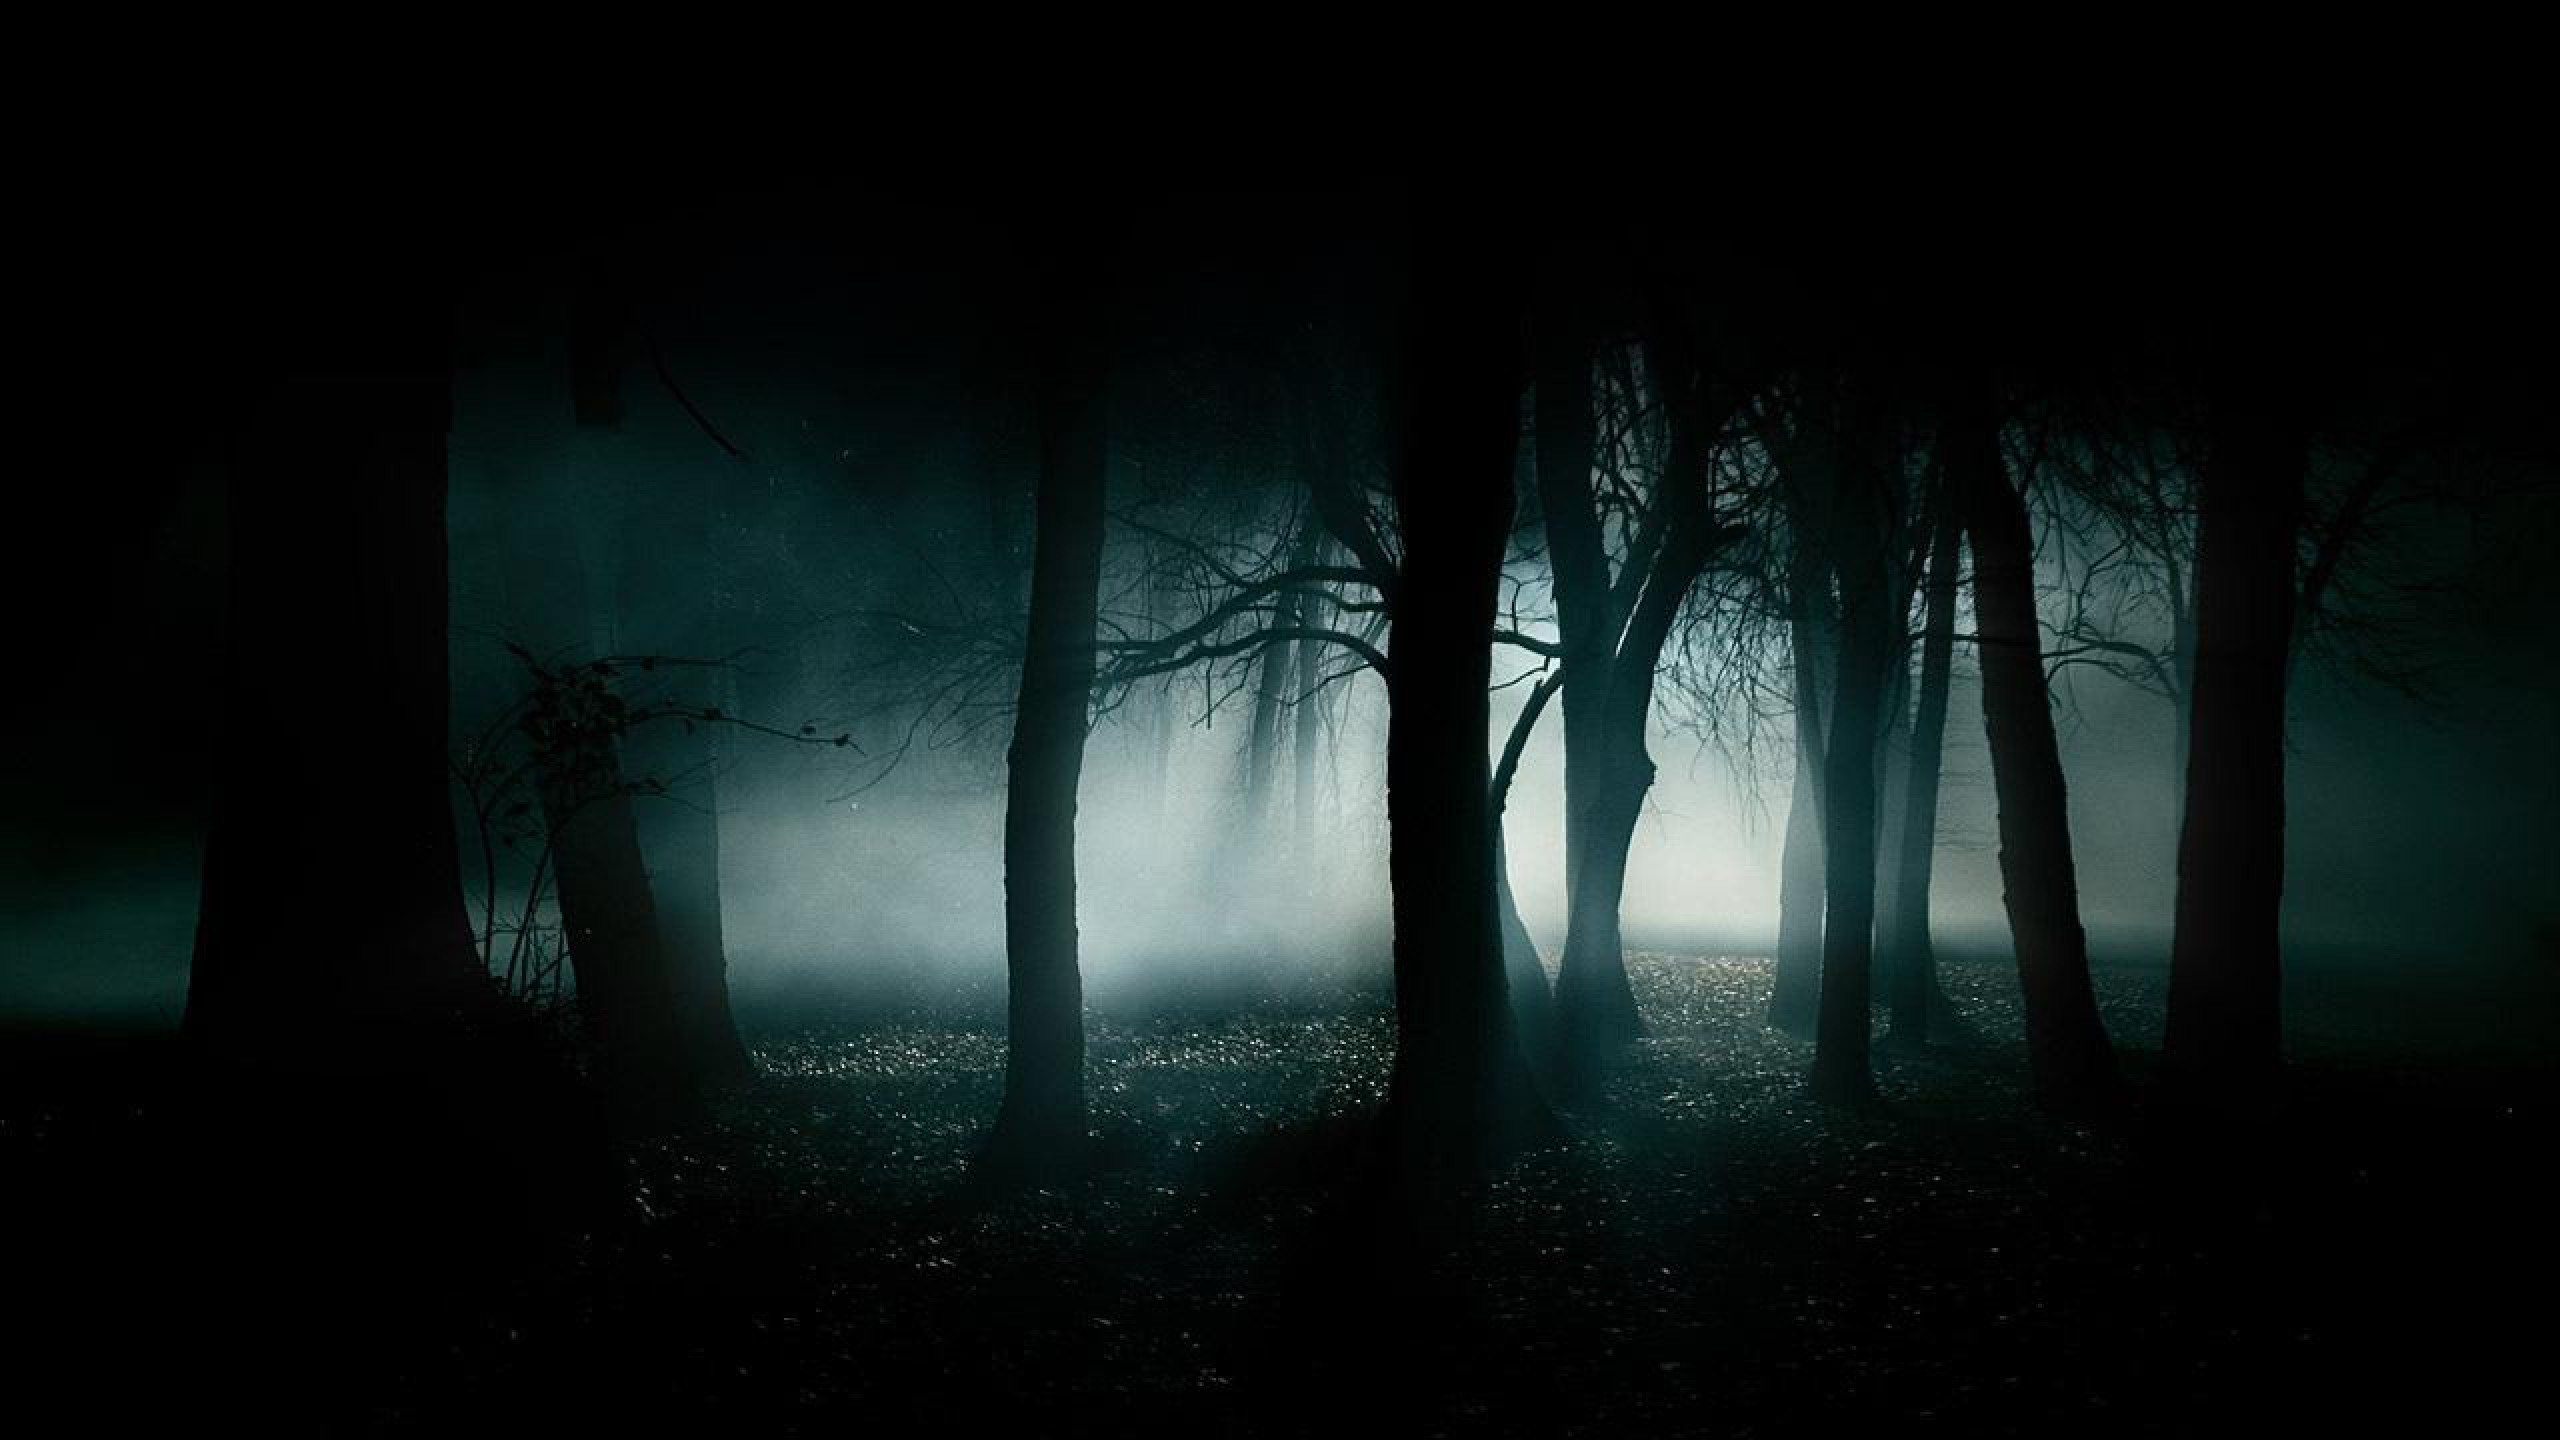 Dark Forest Background Images amp Pictures   Becuo